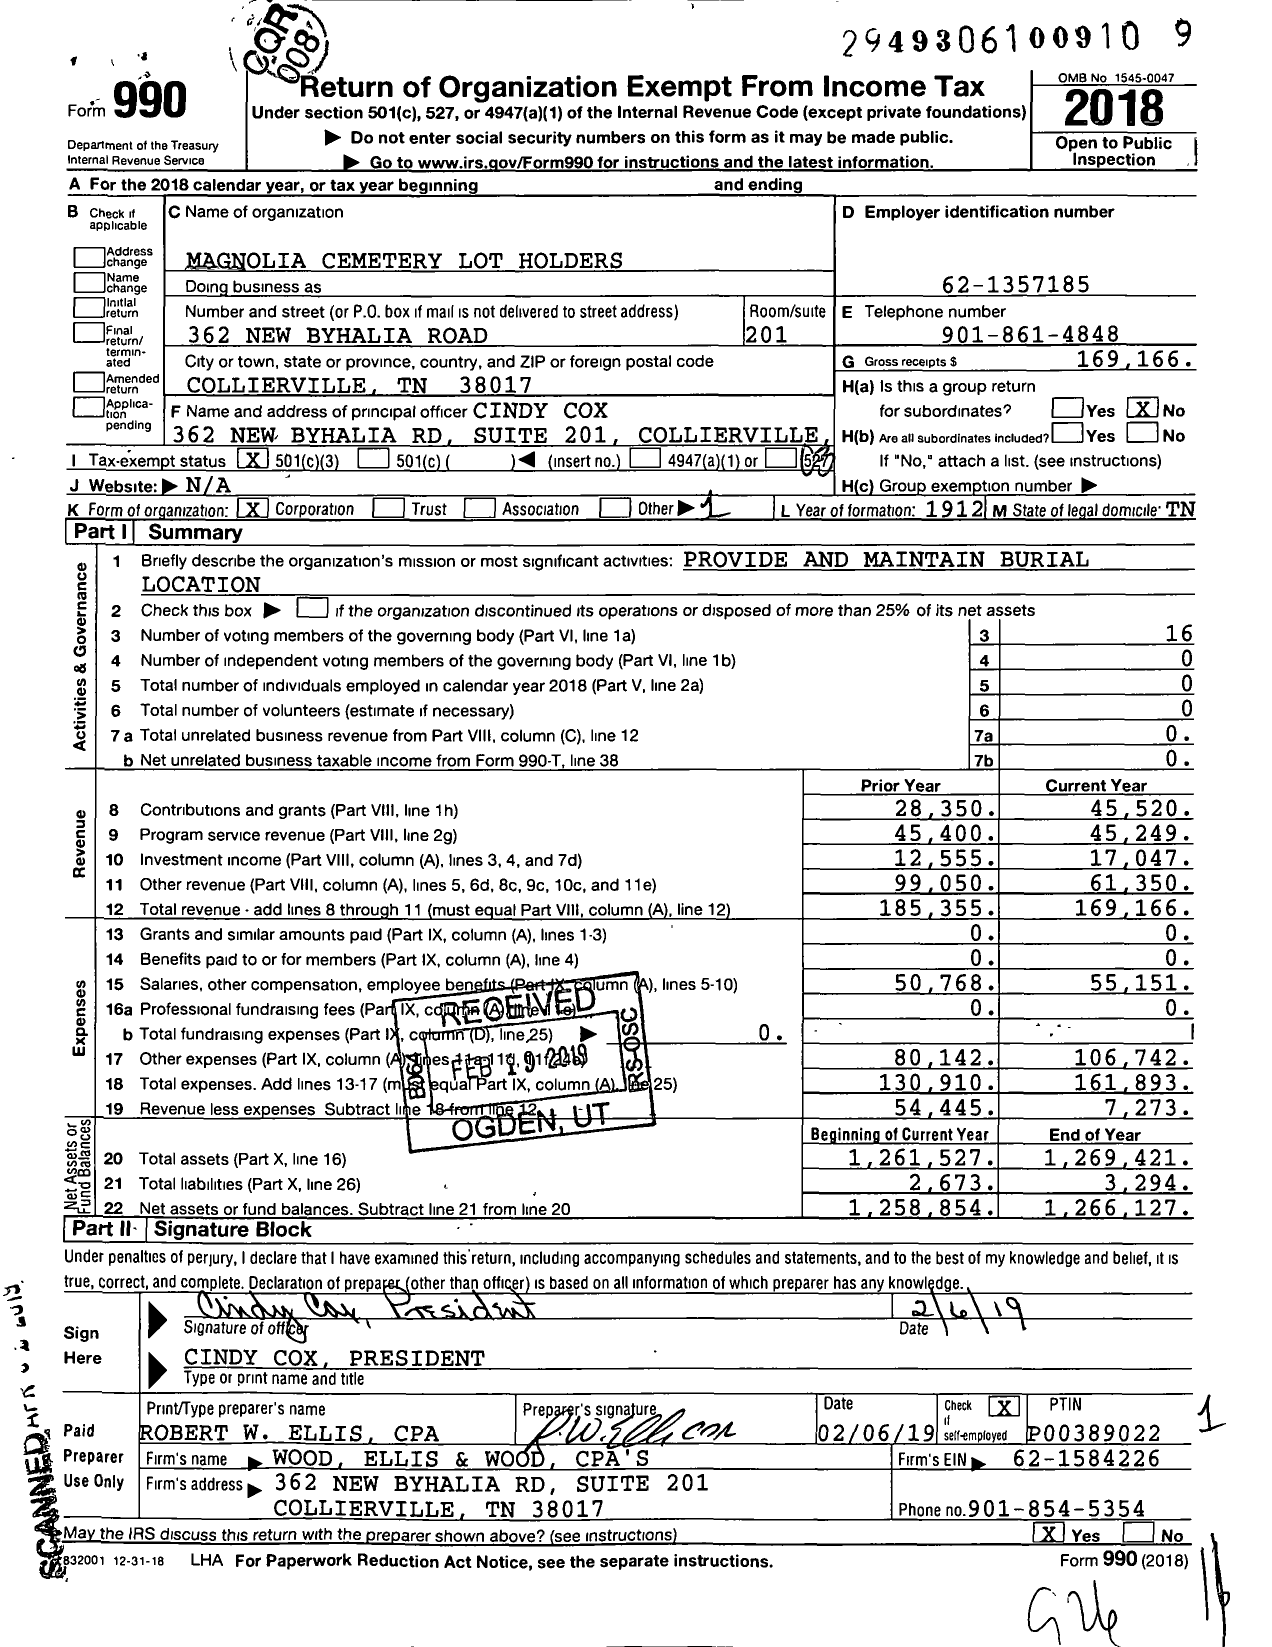 Image of first page of 2018 Form 990 for Magnolia Cemetery Lot Holders